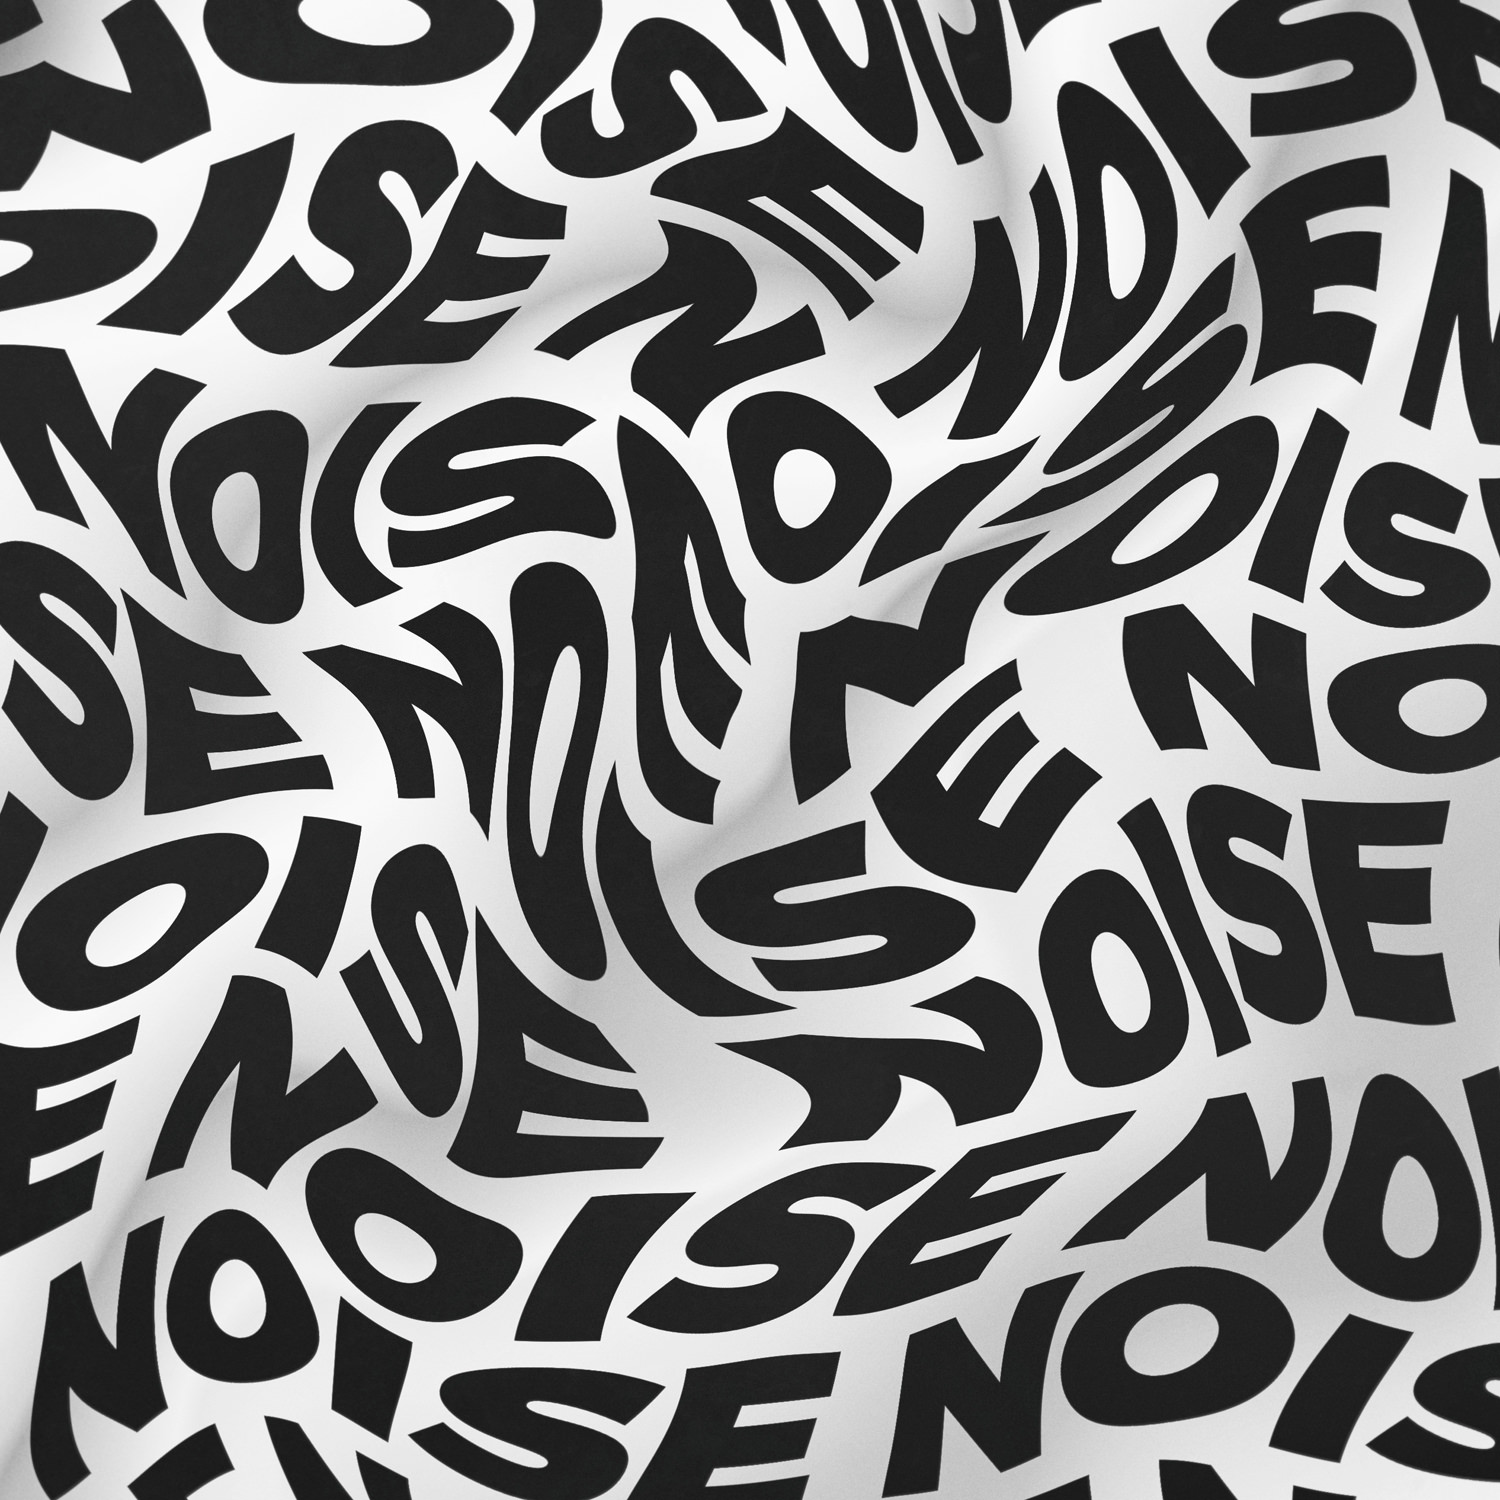 Noise Typography by Herm the Younger